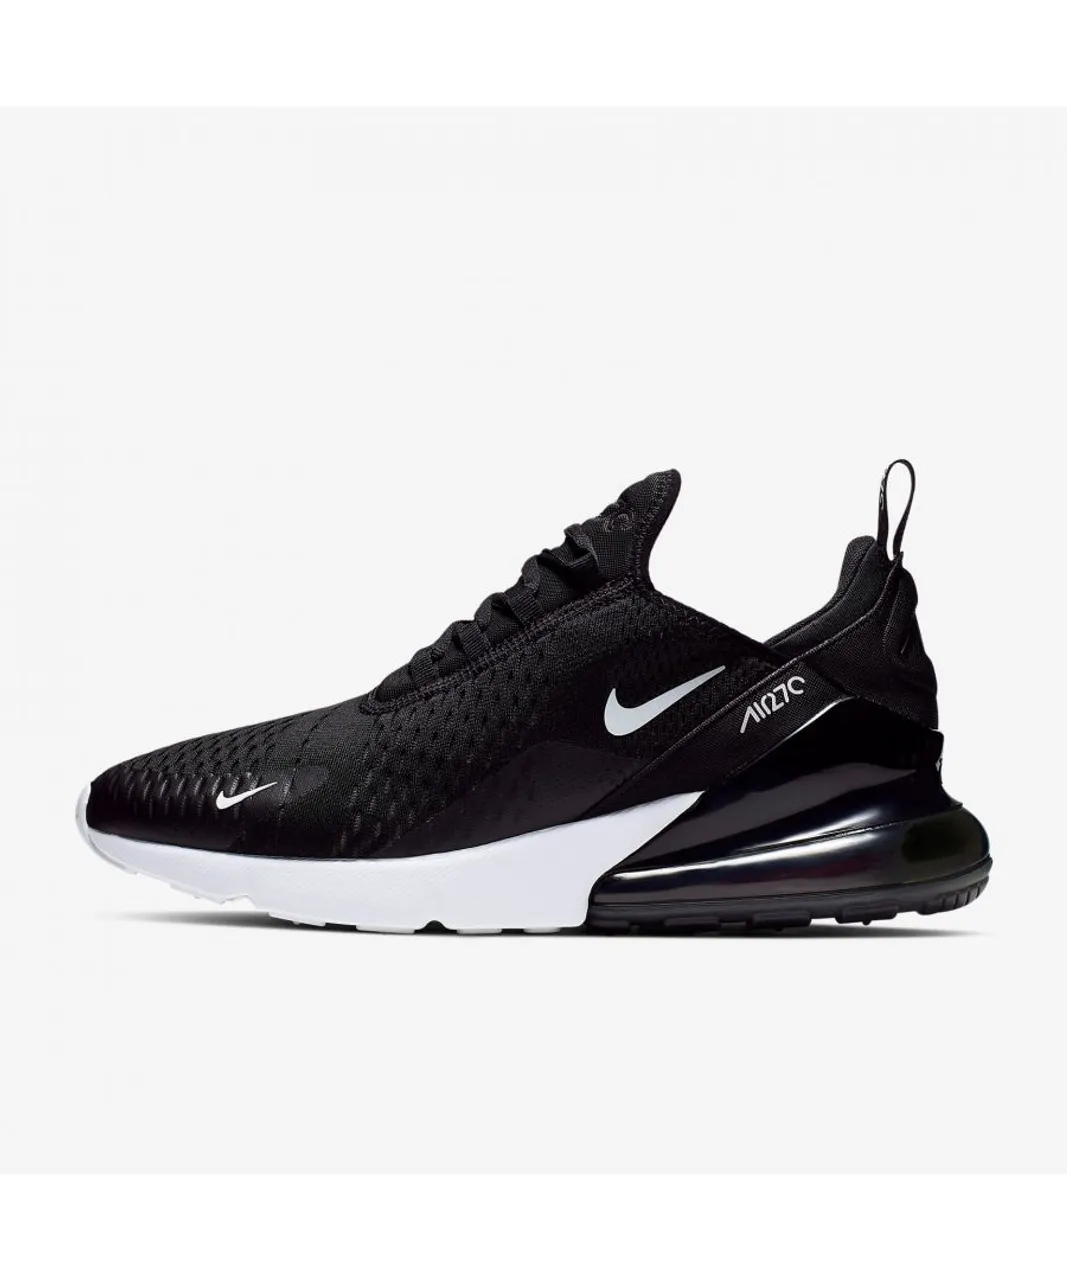 Nike Unisex Air Max 270 Trainers Black/White/Solar Red/Anthracite Mesh